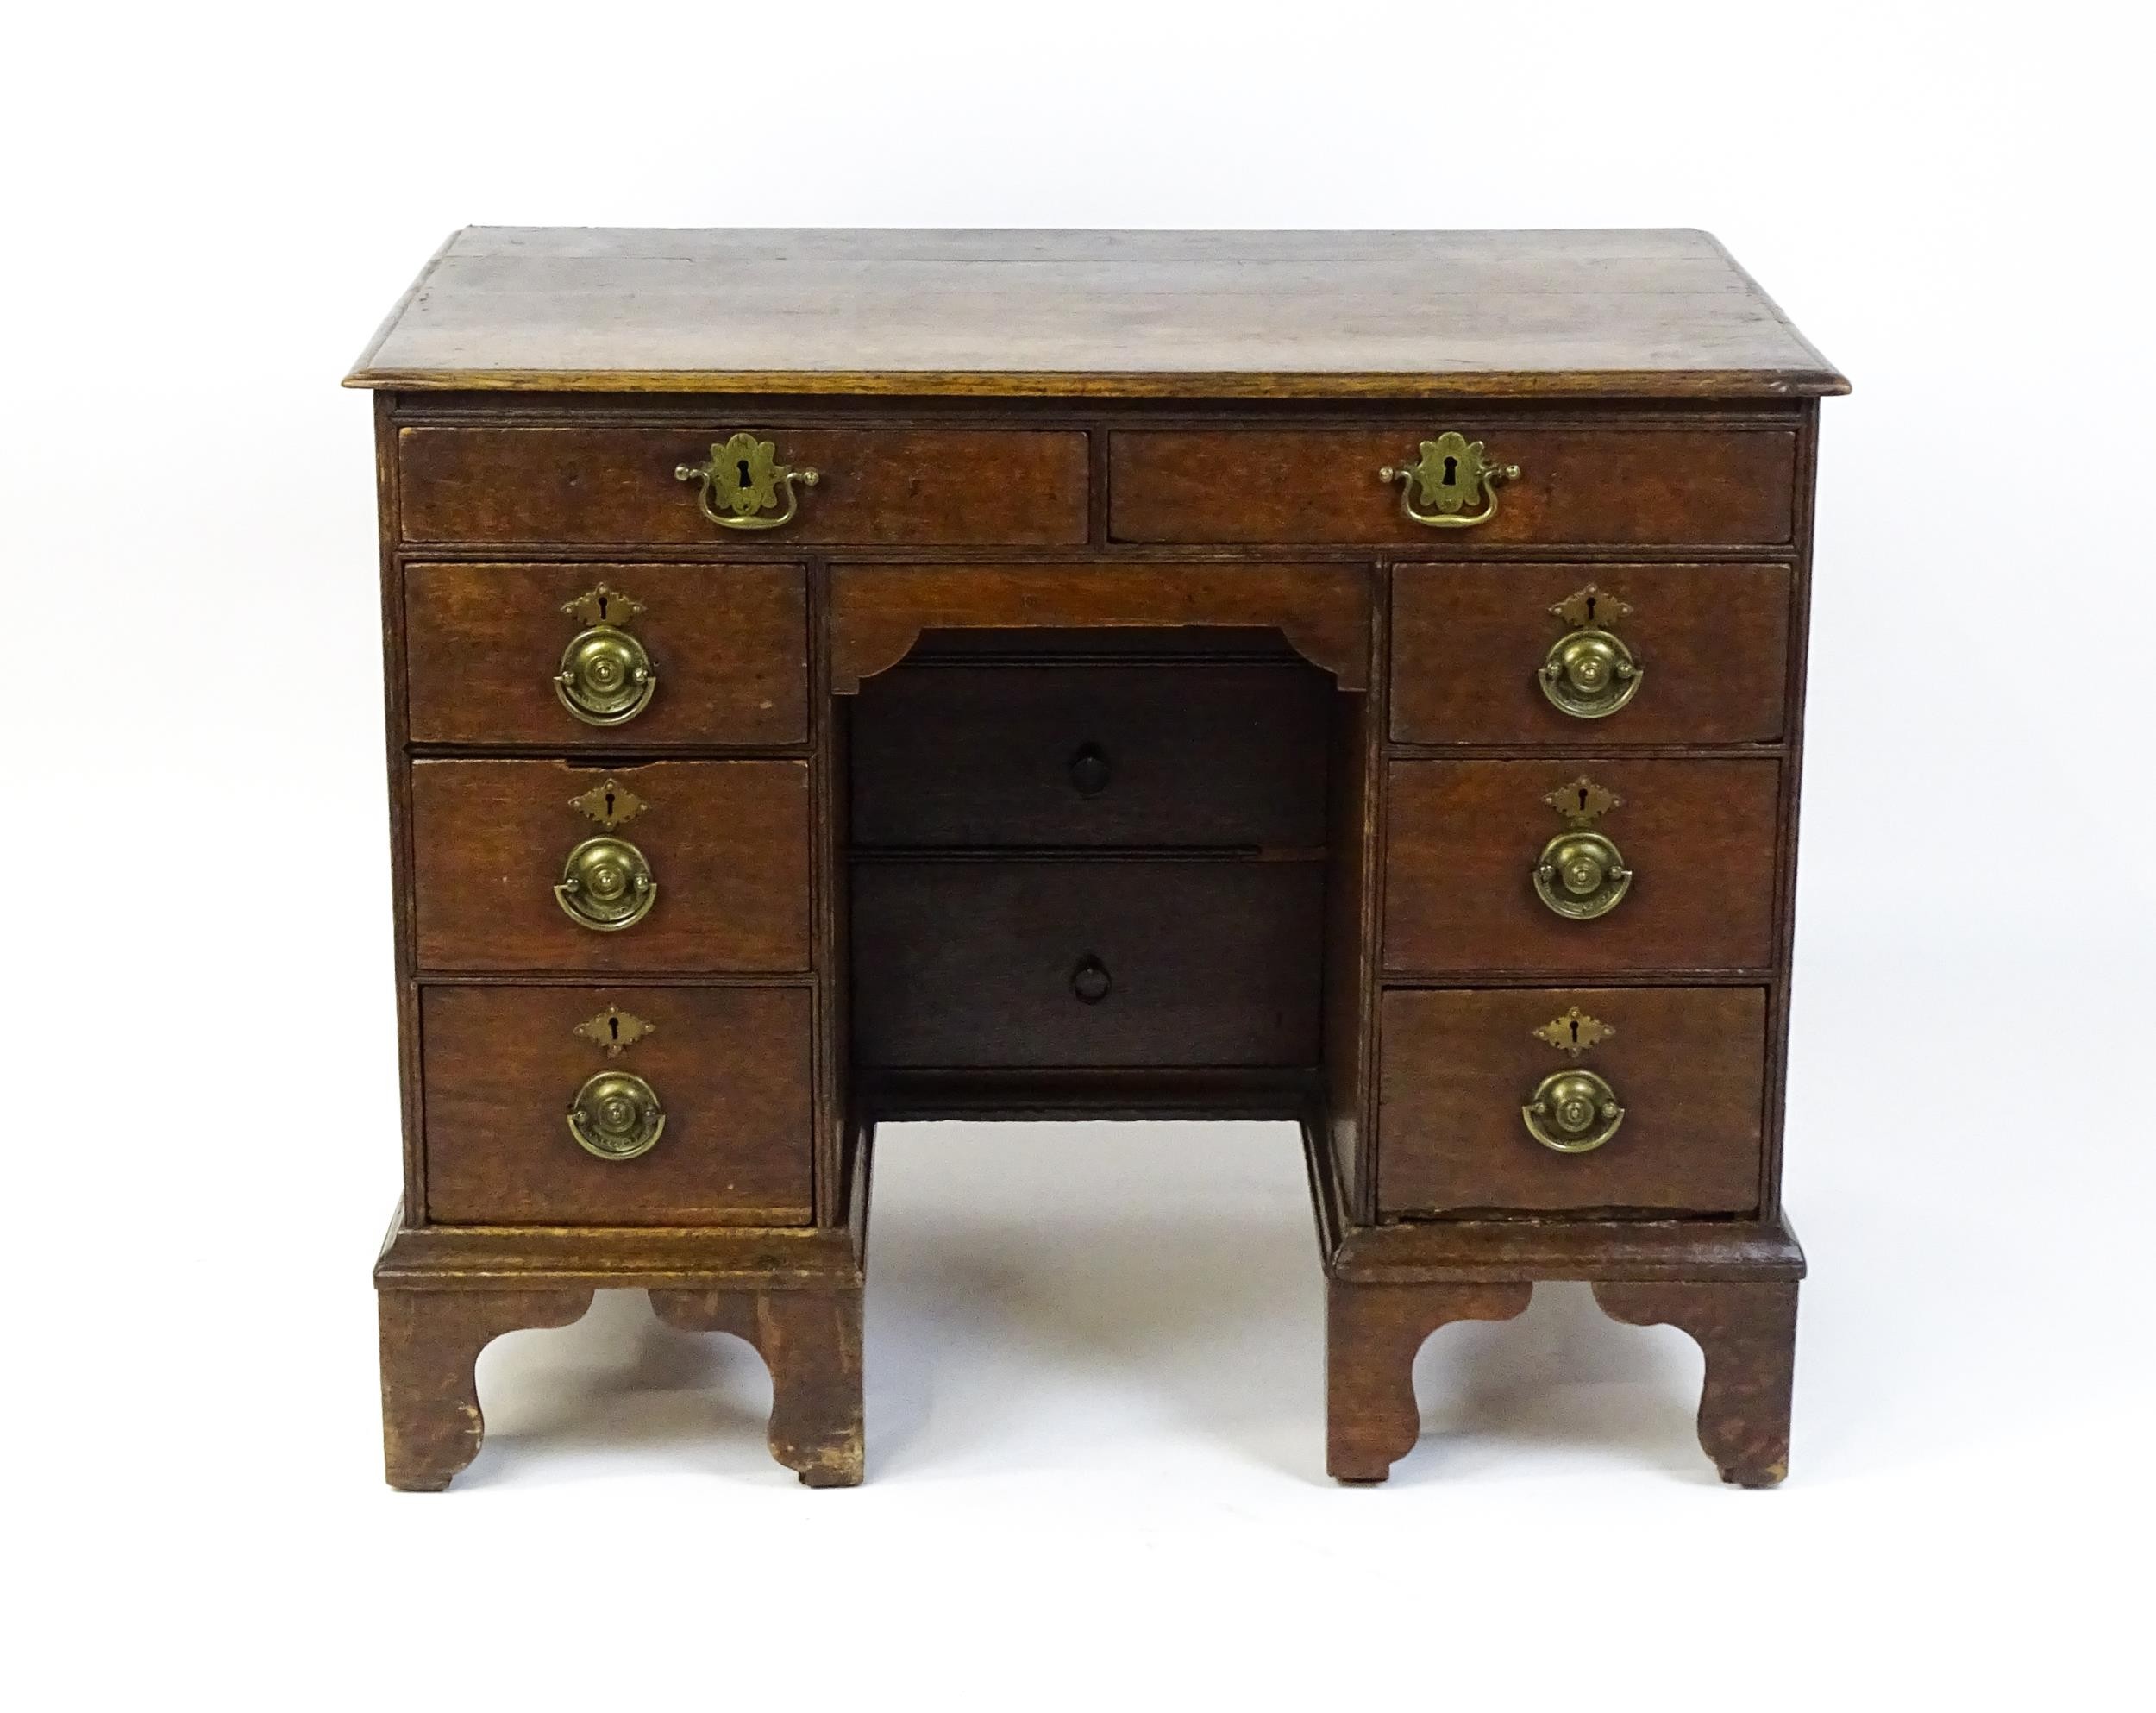 An early / mid 18thC oak kneehole desk with a moulded top above two short drawers and two banks of - Image 5 of 10